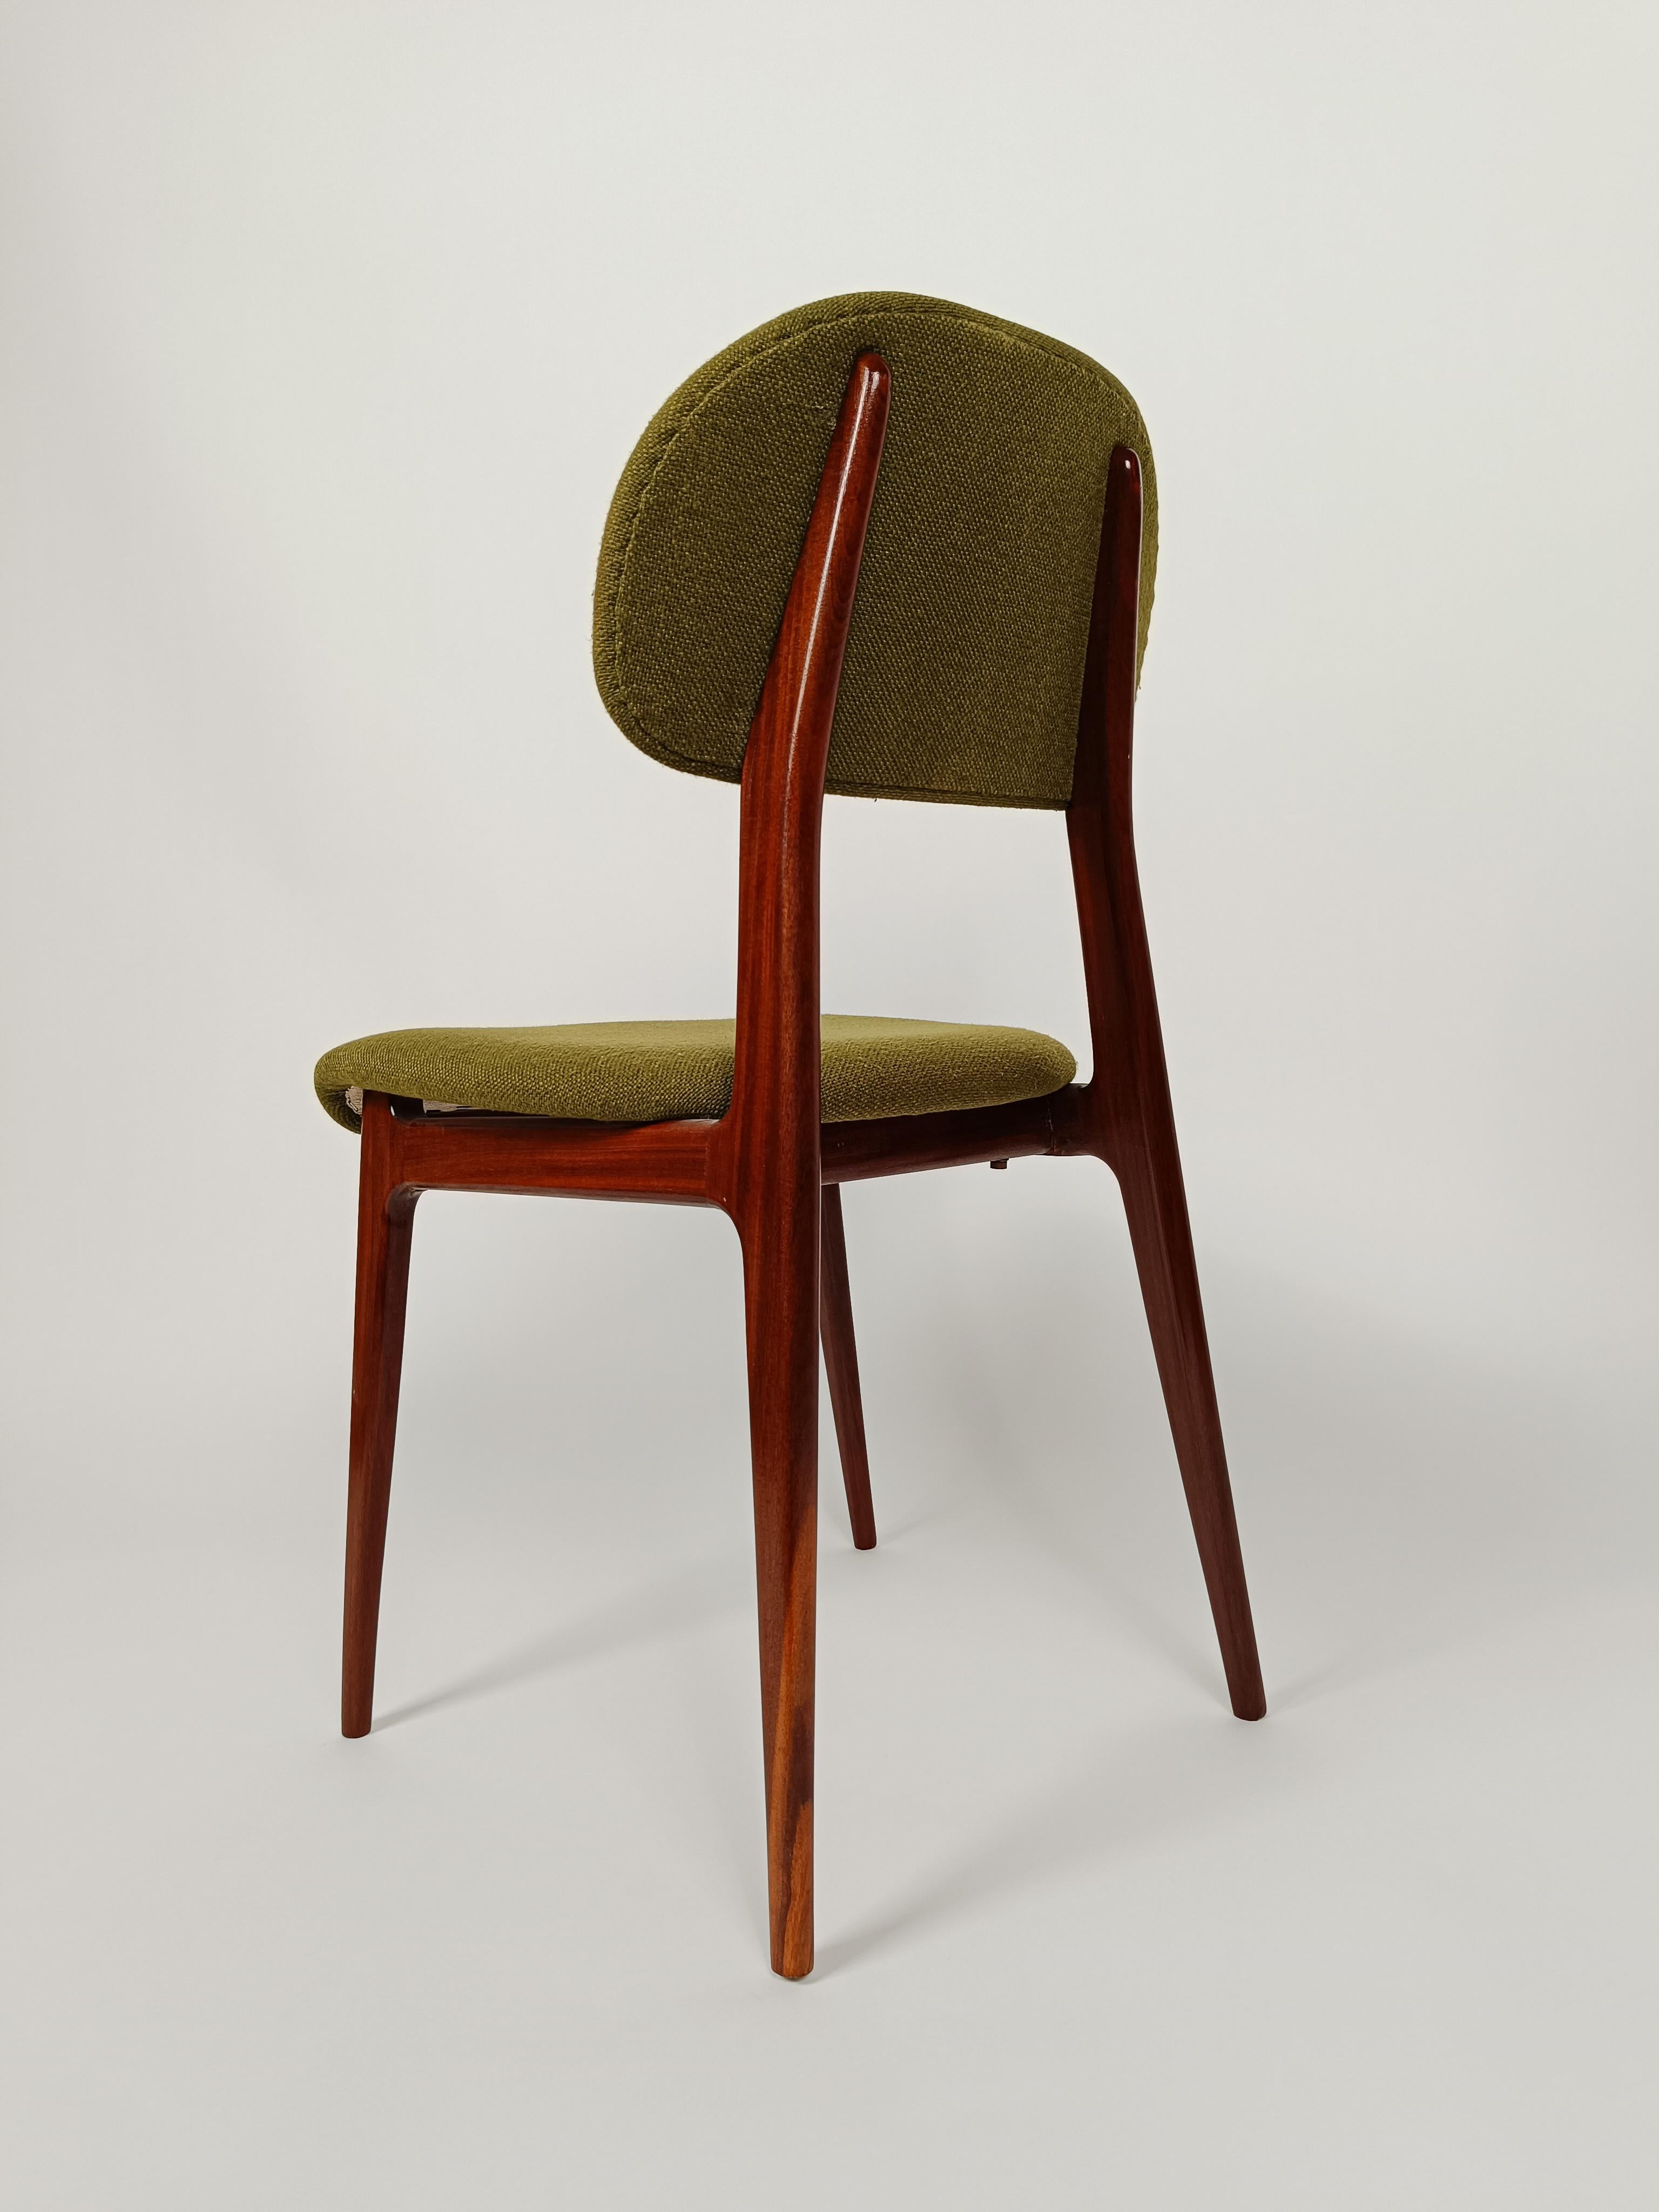 Mid-Century Modern Italian Midcentury Chairs Attributed to Carlo Hauner and Martin Eisler, 1960s For Sale